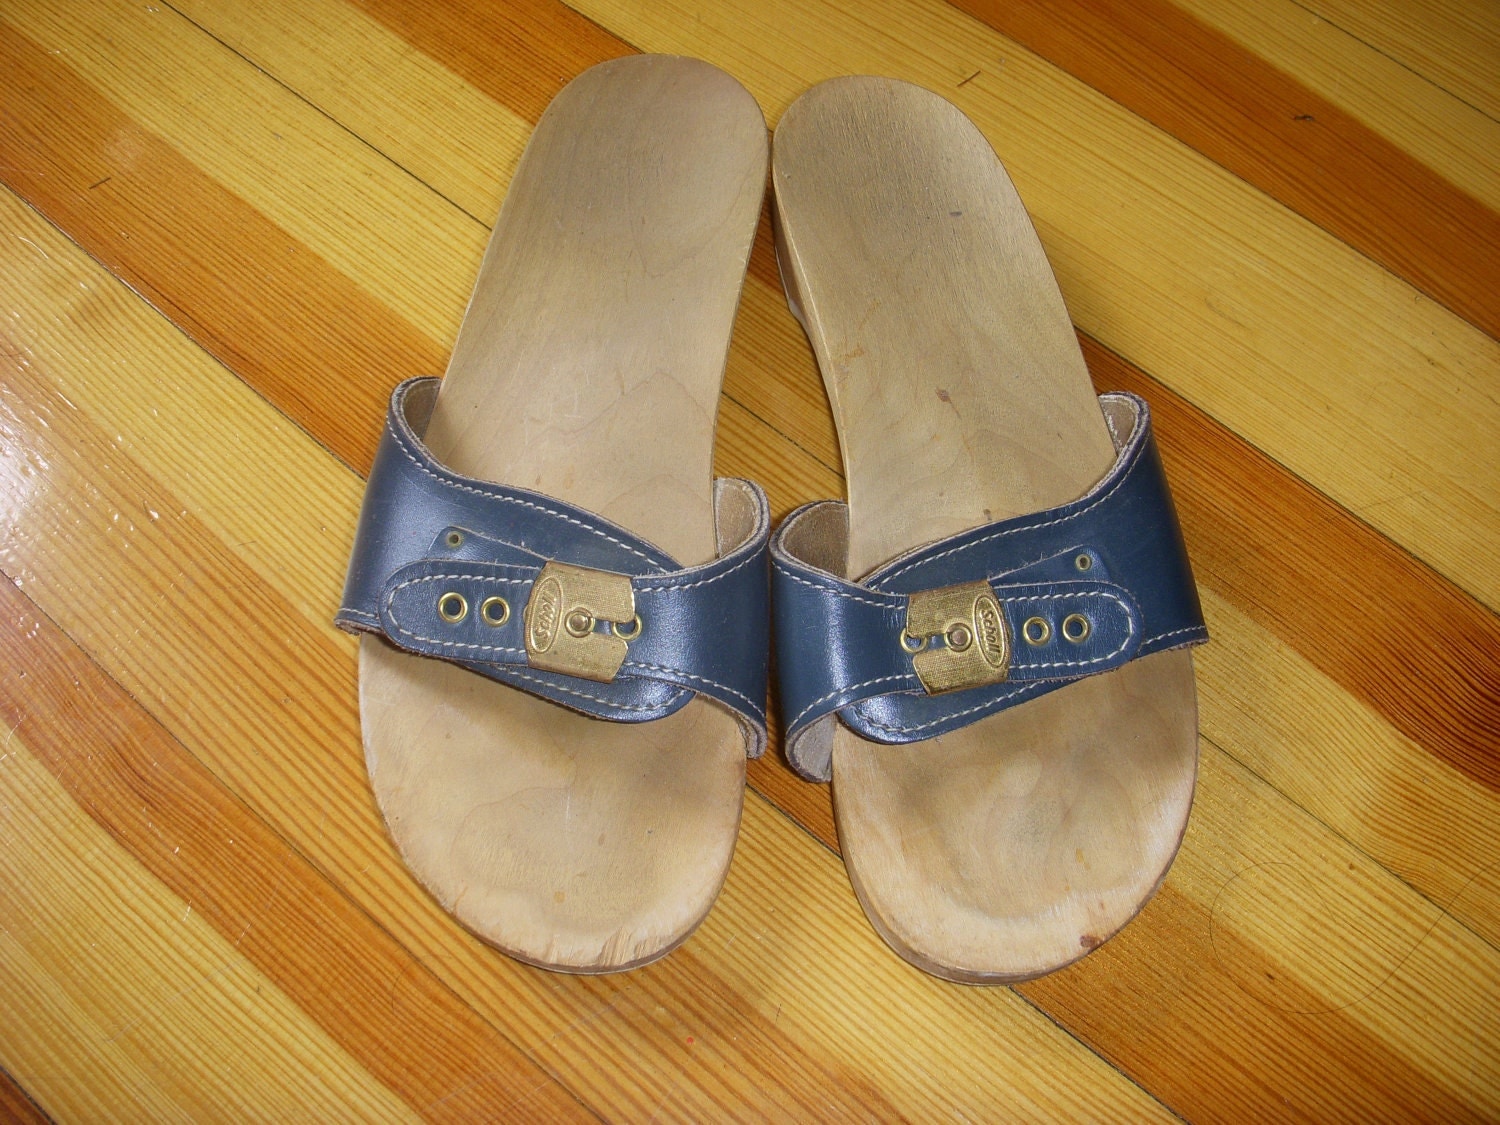 Vintage Dr Scholls Sandals Slides Wooden By Myyiayiahadthat